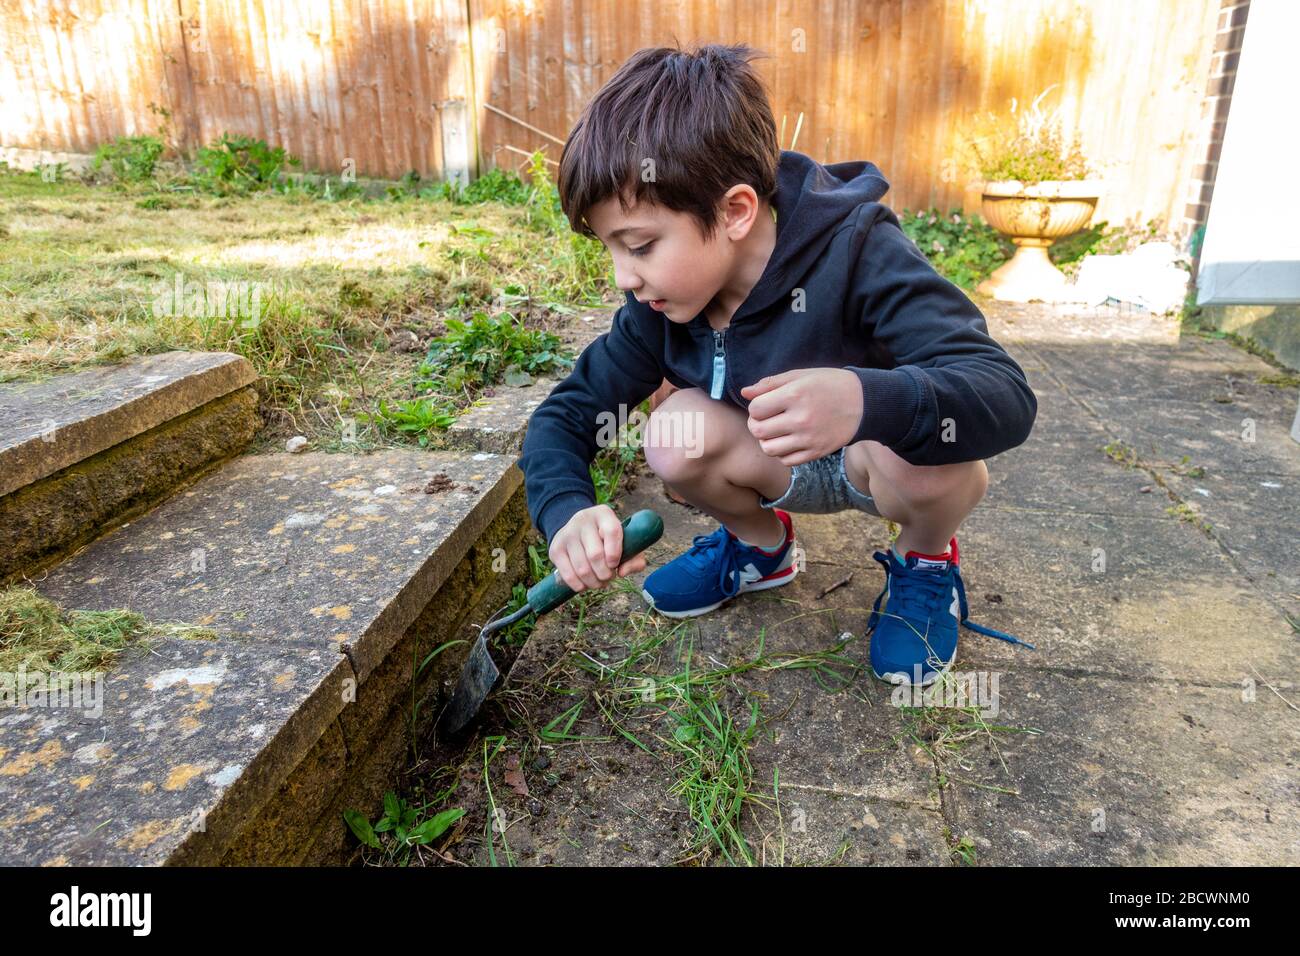 A young boy digging up weeds using a hand trowel in the garden. Stock Photo